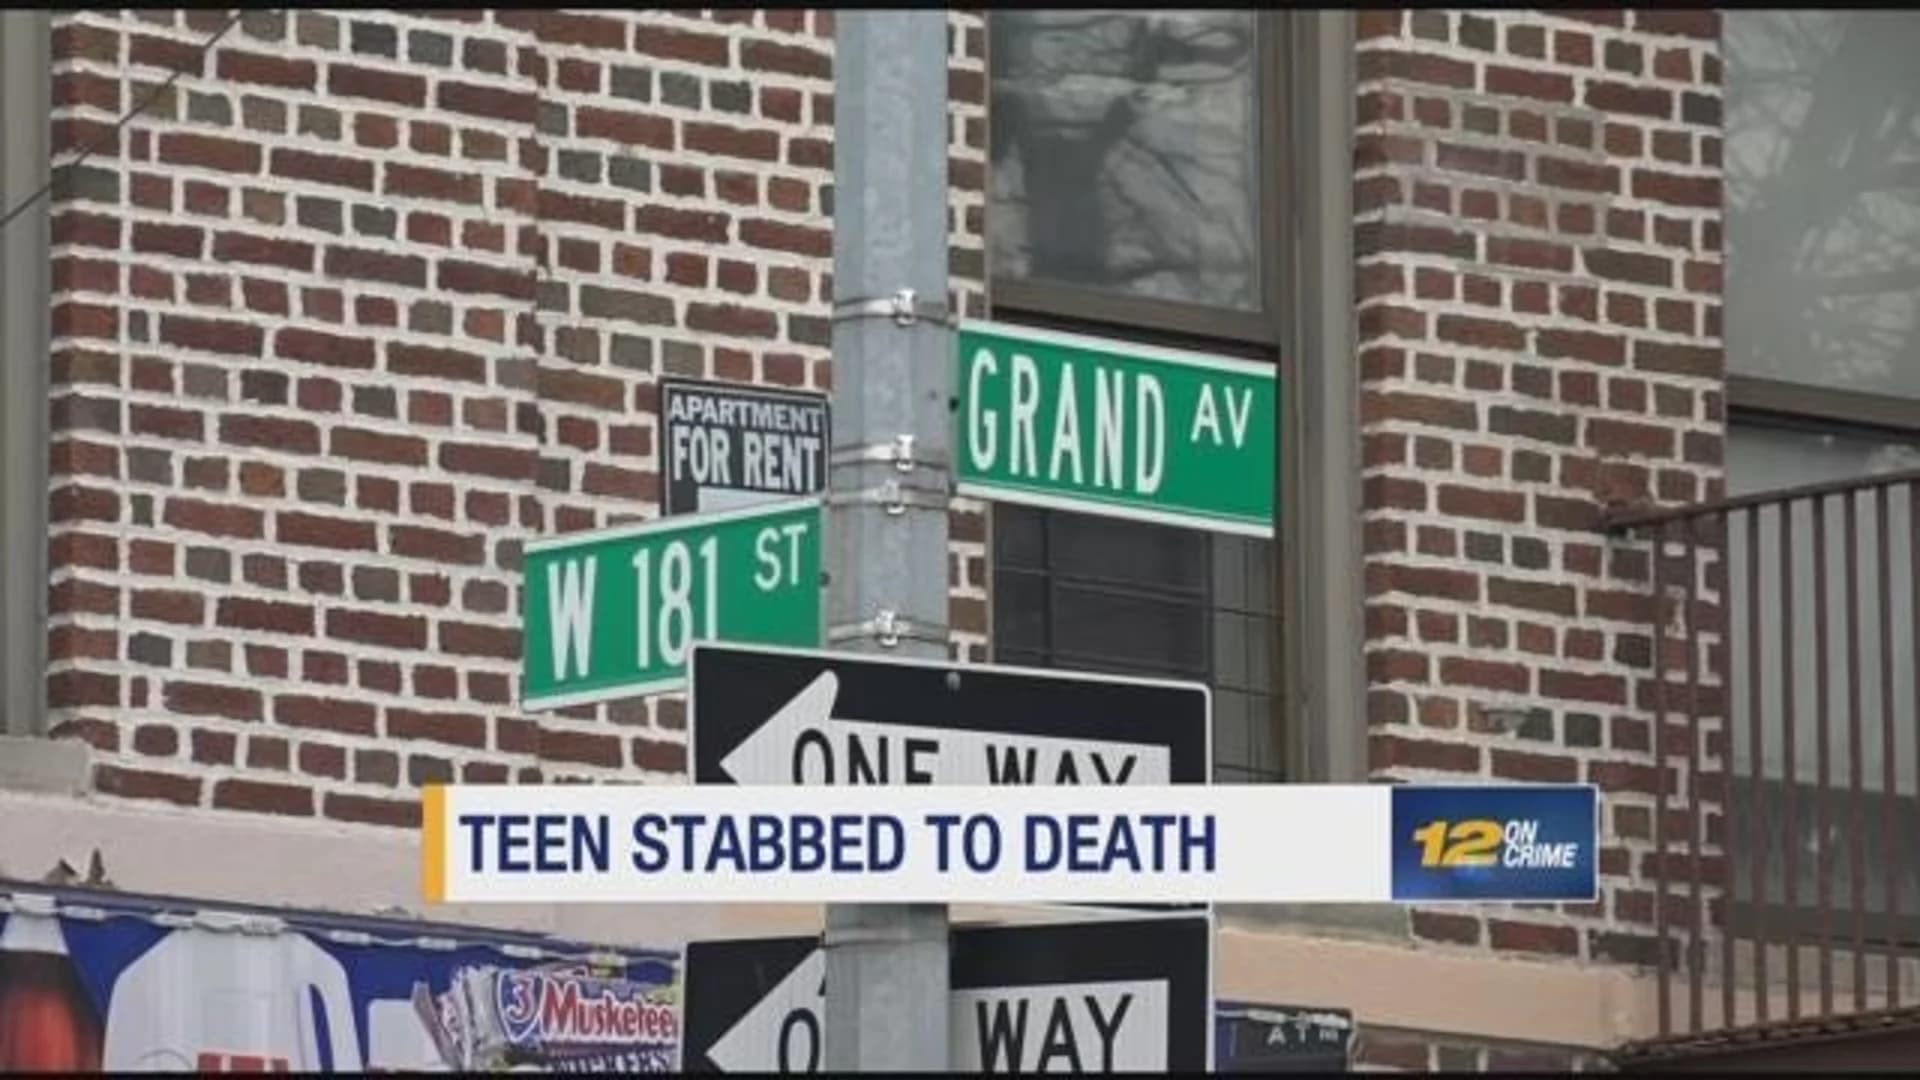 Police: 16-year-old fatally stabbed on West 181st Street